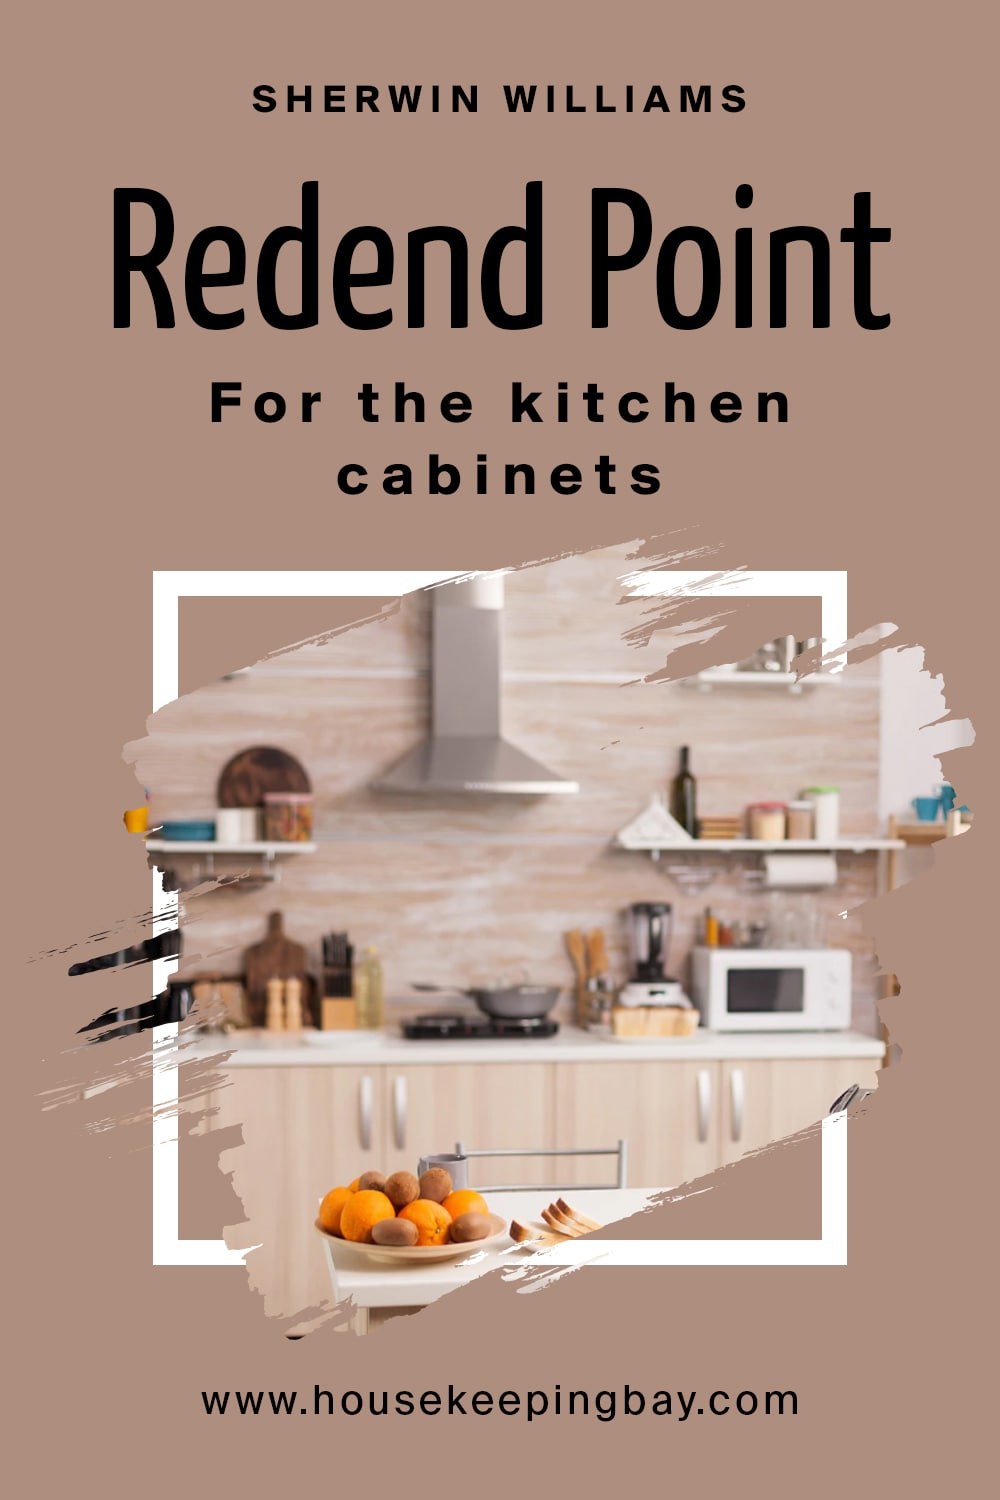 Sherwin Williams. Redend Point For the kitchen cabinets